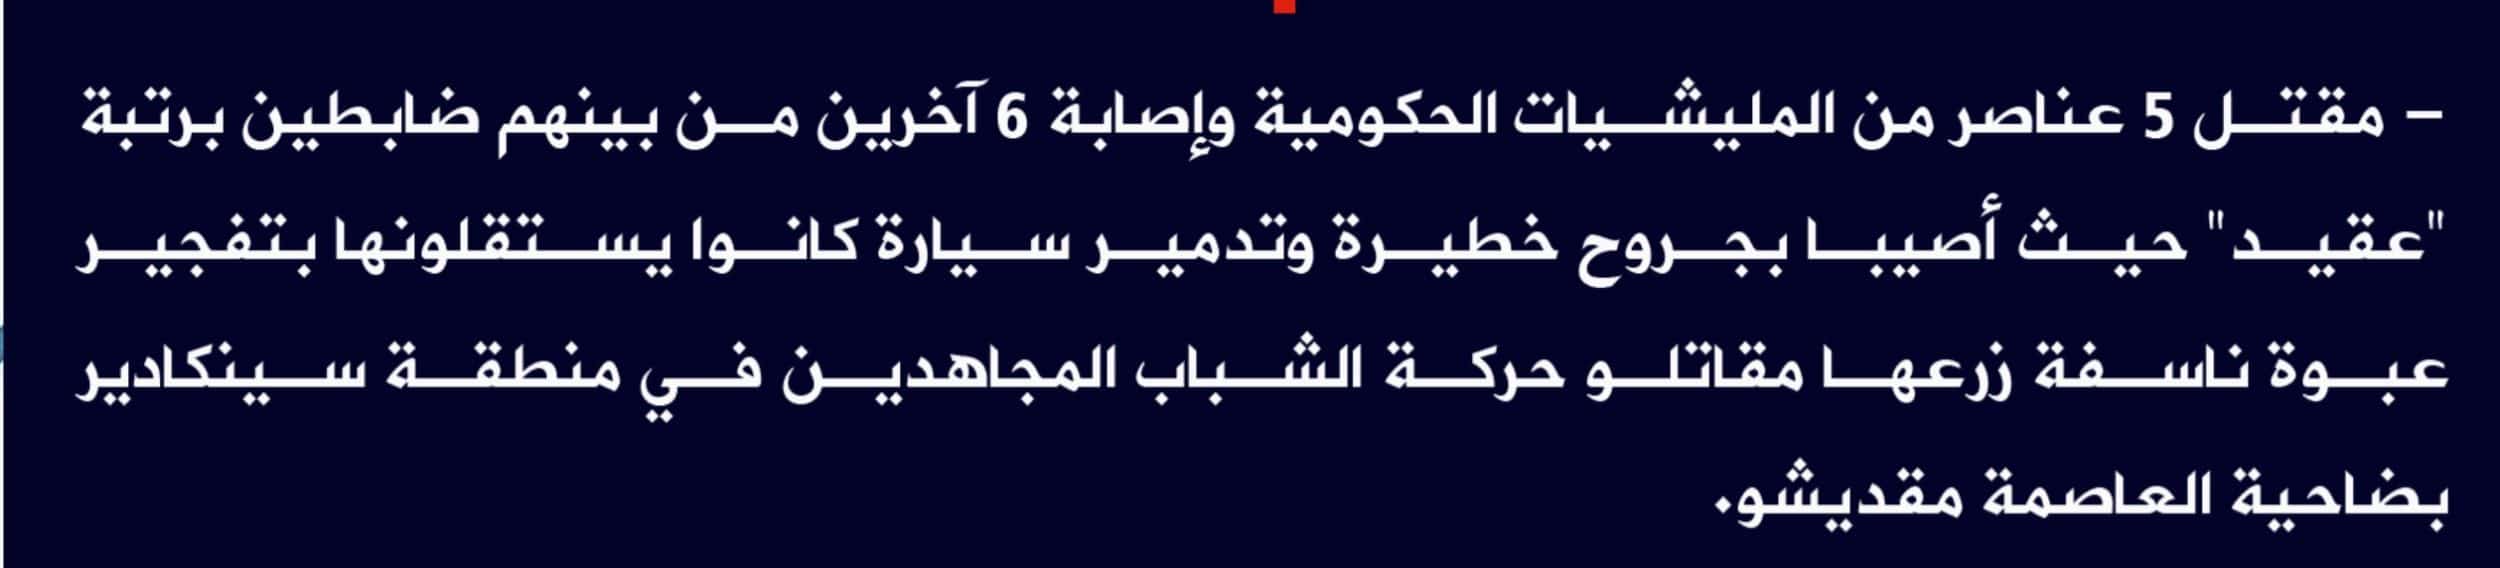 (Claim) al-Shabaab: Five Somalian Forces Were Killed, Six Others Were Injured, Including Two Colonels, and Their Vehicle Destroyed by an IED in Sinkandir, Mogadishu, Somalia - 30 May 2022